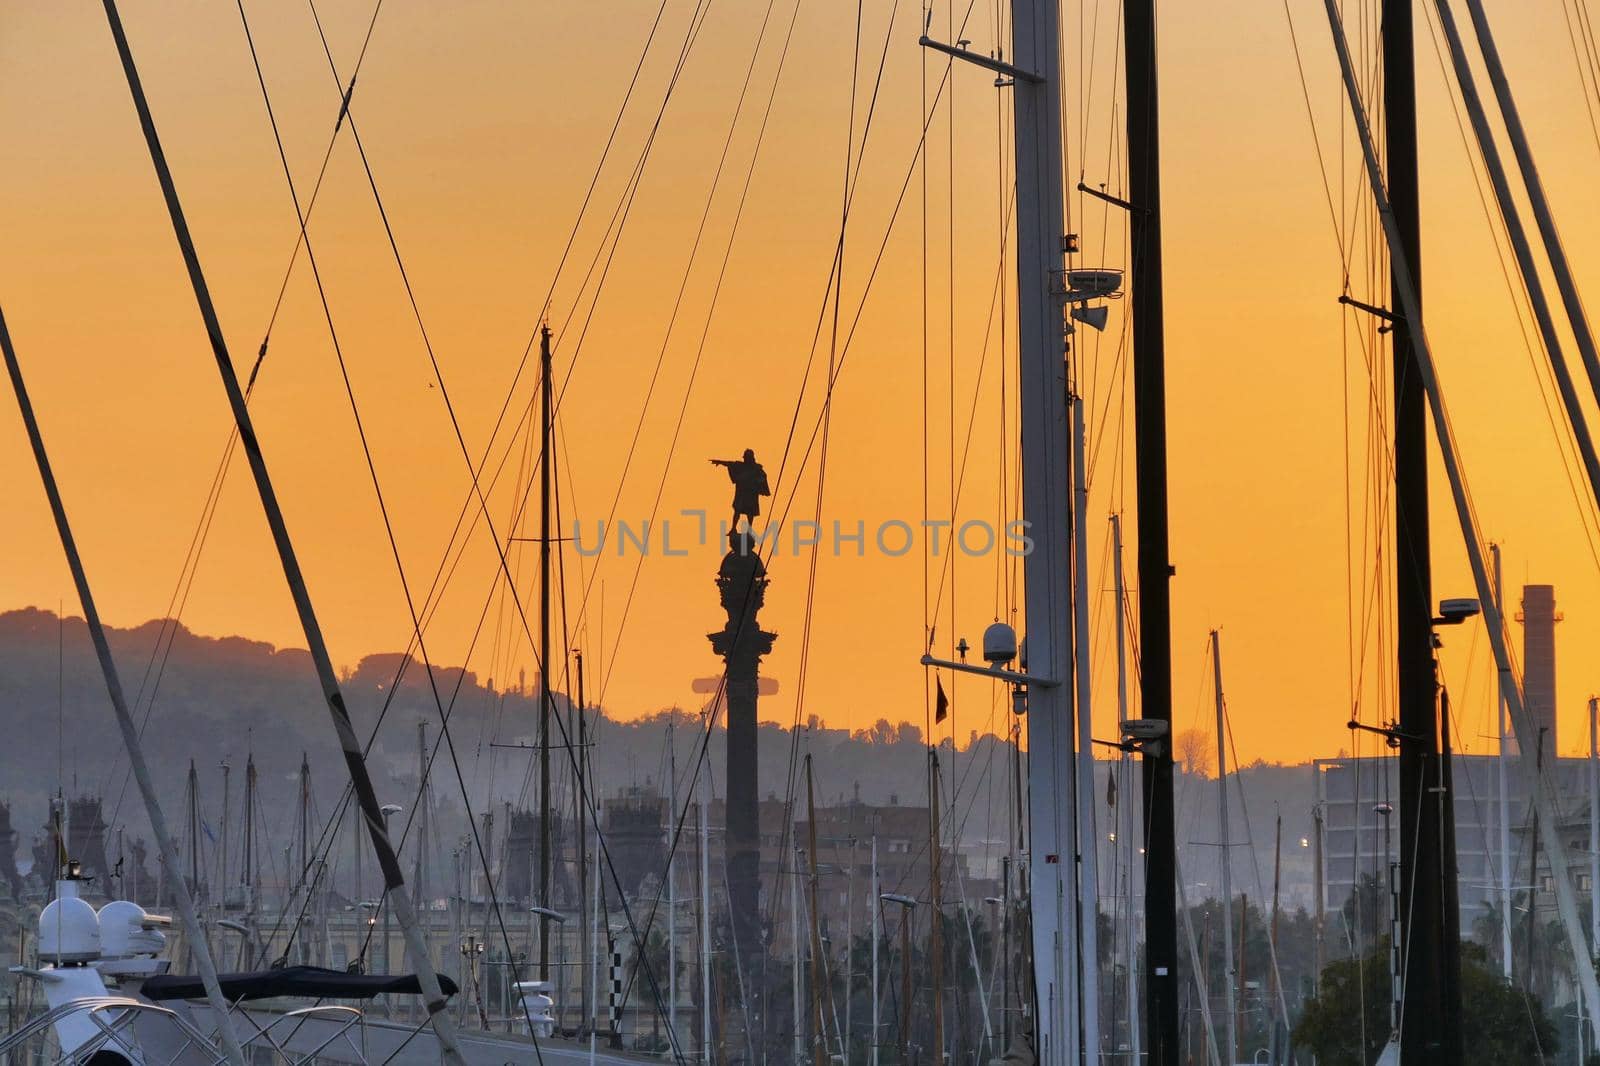 Cristoforo Colombo statue silhouette view through trees and shrouds of the boats moored in the port at sunset by lemar